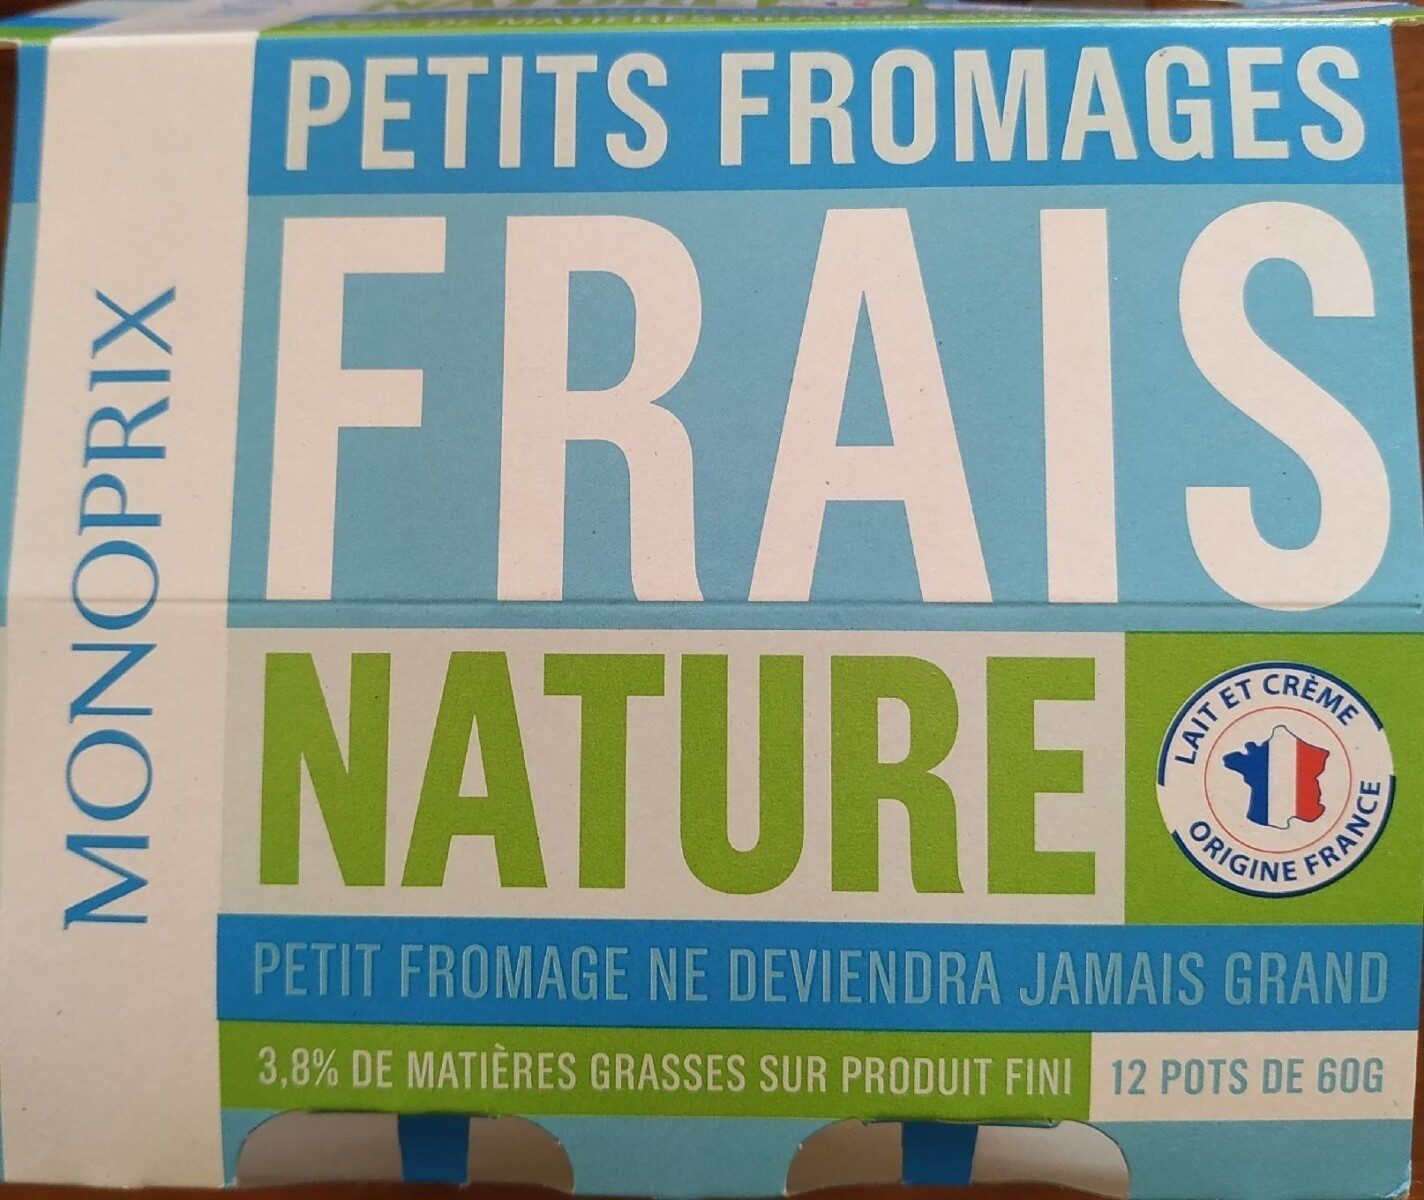 Petits fromages frais nature - Product - fr